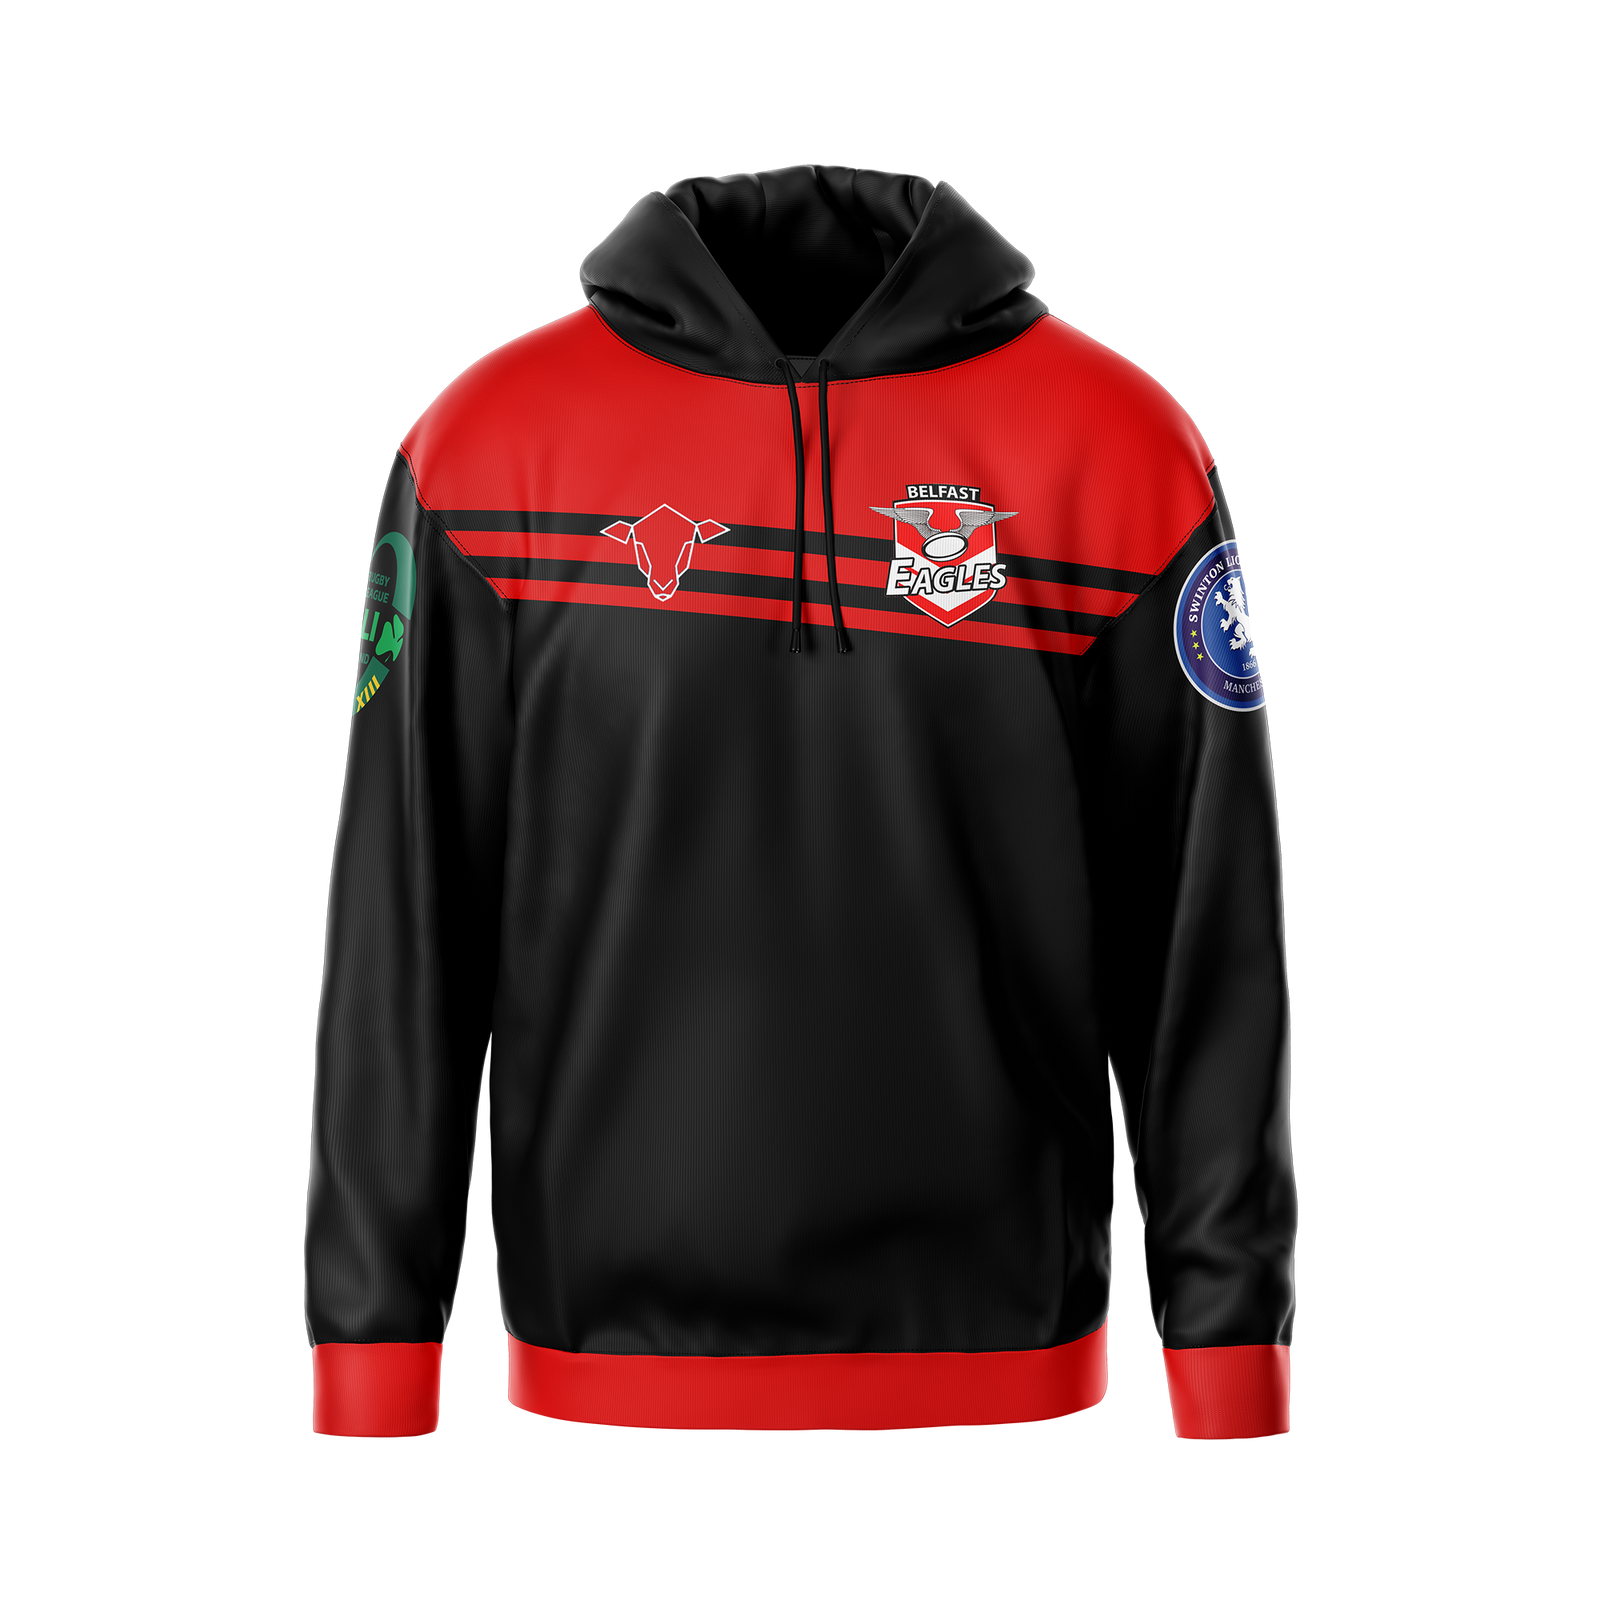 Adults Belfast Eagles Youth Hoodie